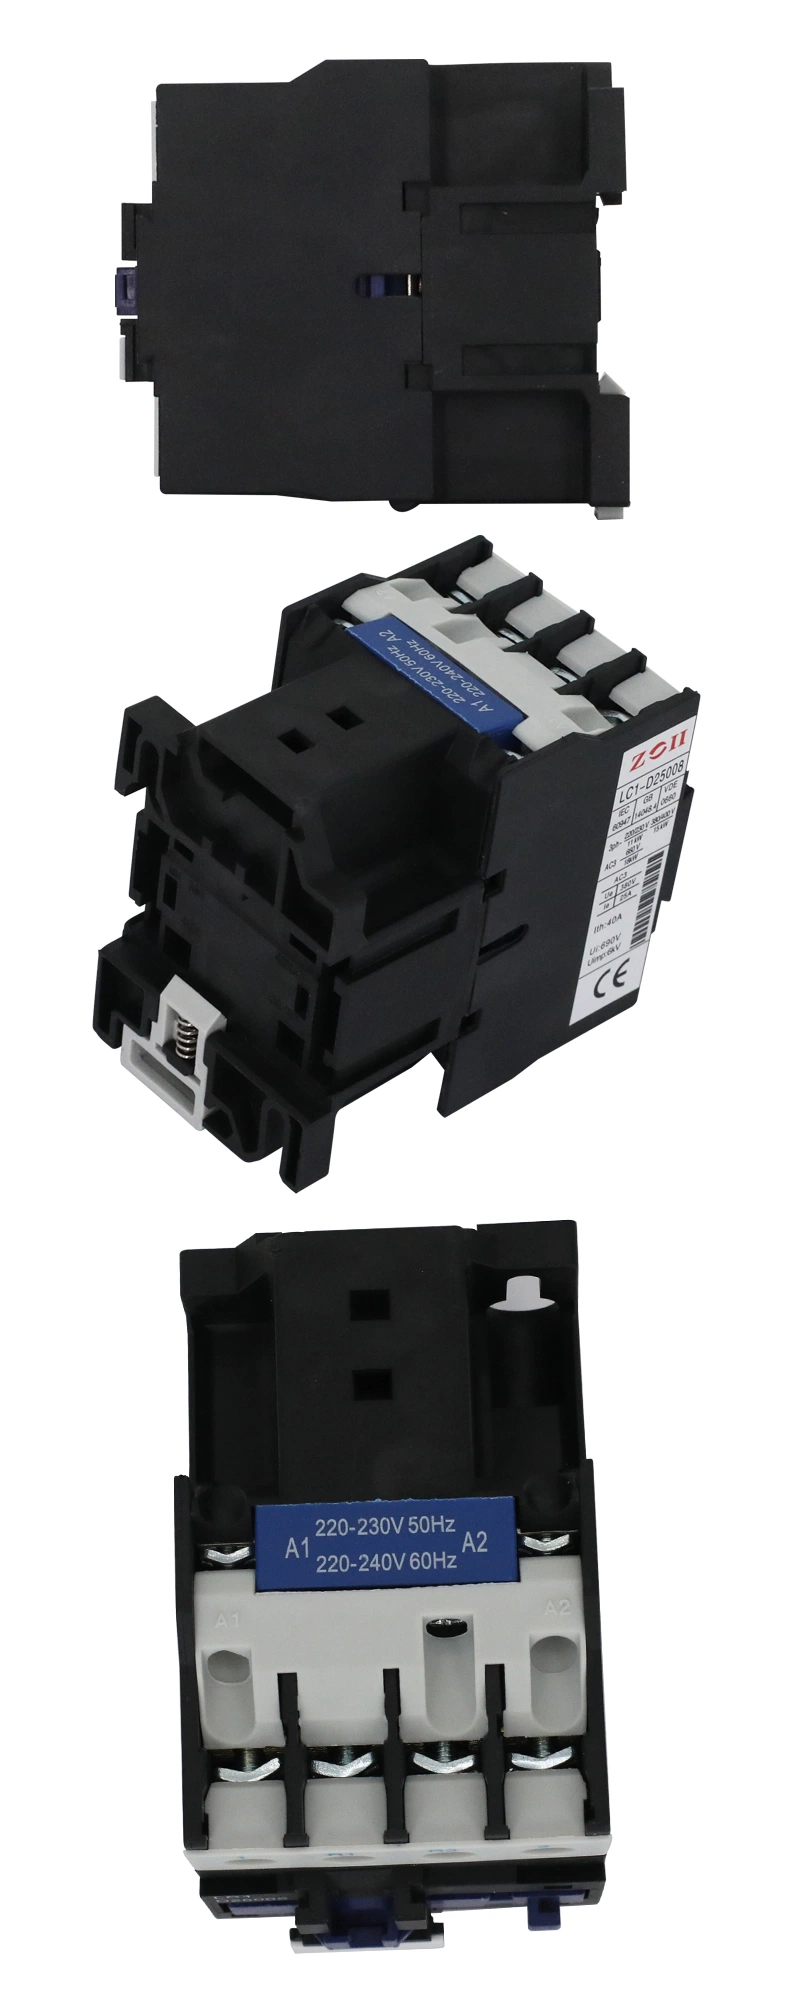 Zoii Electric 1no+1nc 3p 220V Contactors 9A 12A 18A 25A 32A 38A 40A 65A 80A 95A AC Magnetic Contactor Price